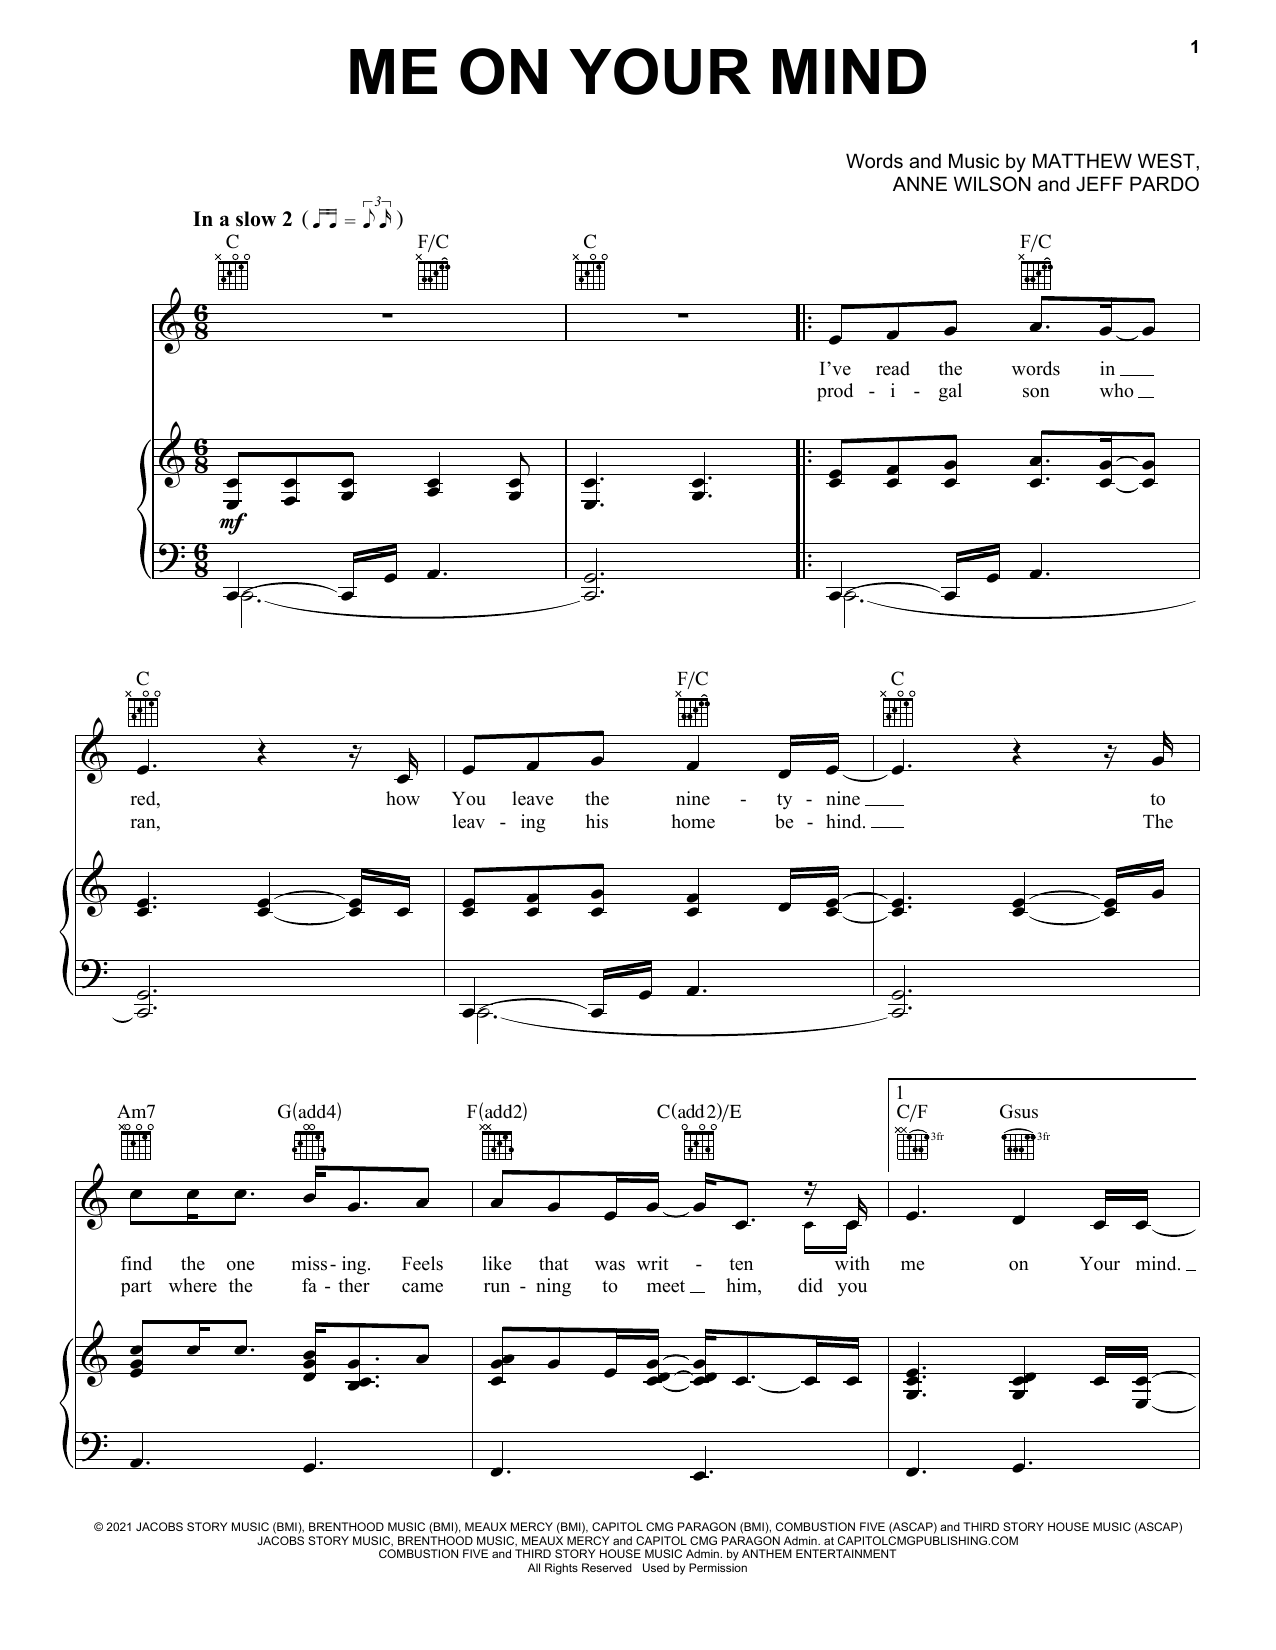 Matthew West Me On Your Mind sheet music notes and chords. Download Printable PDF.